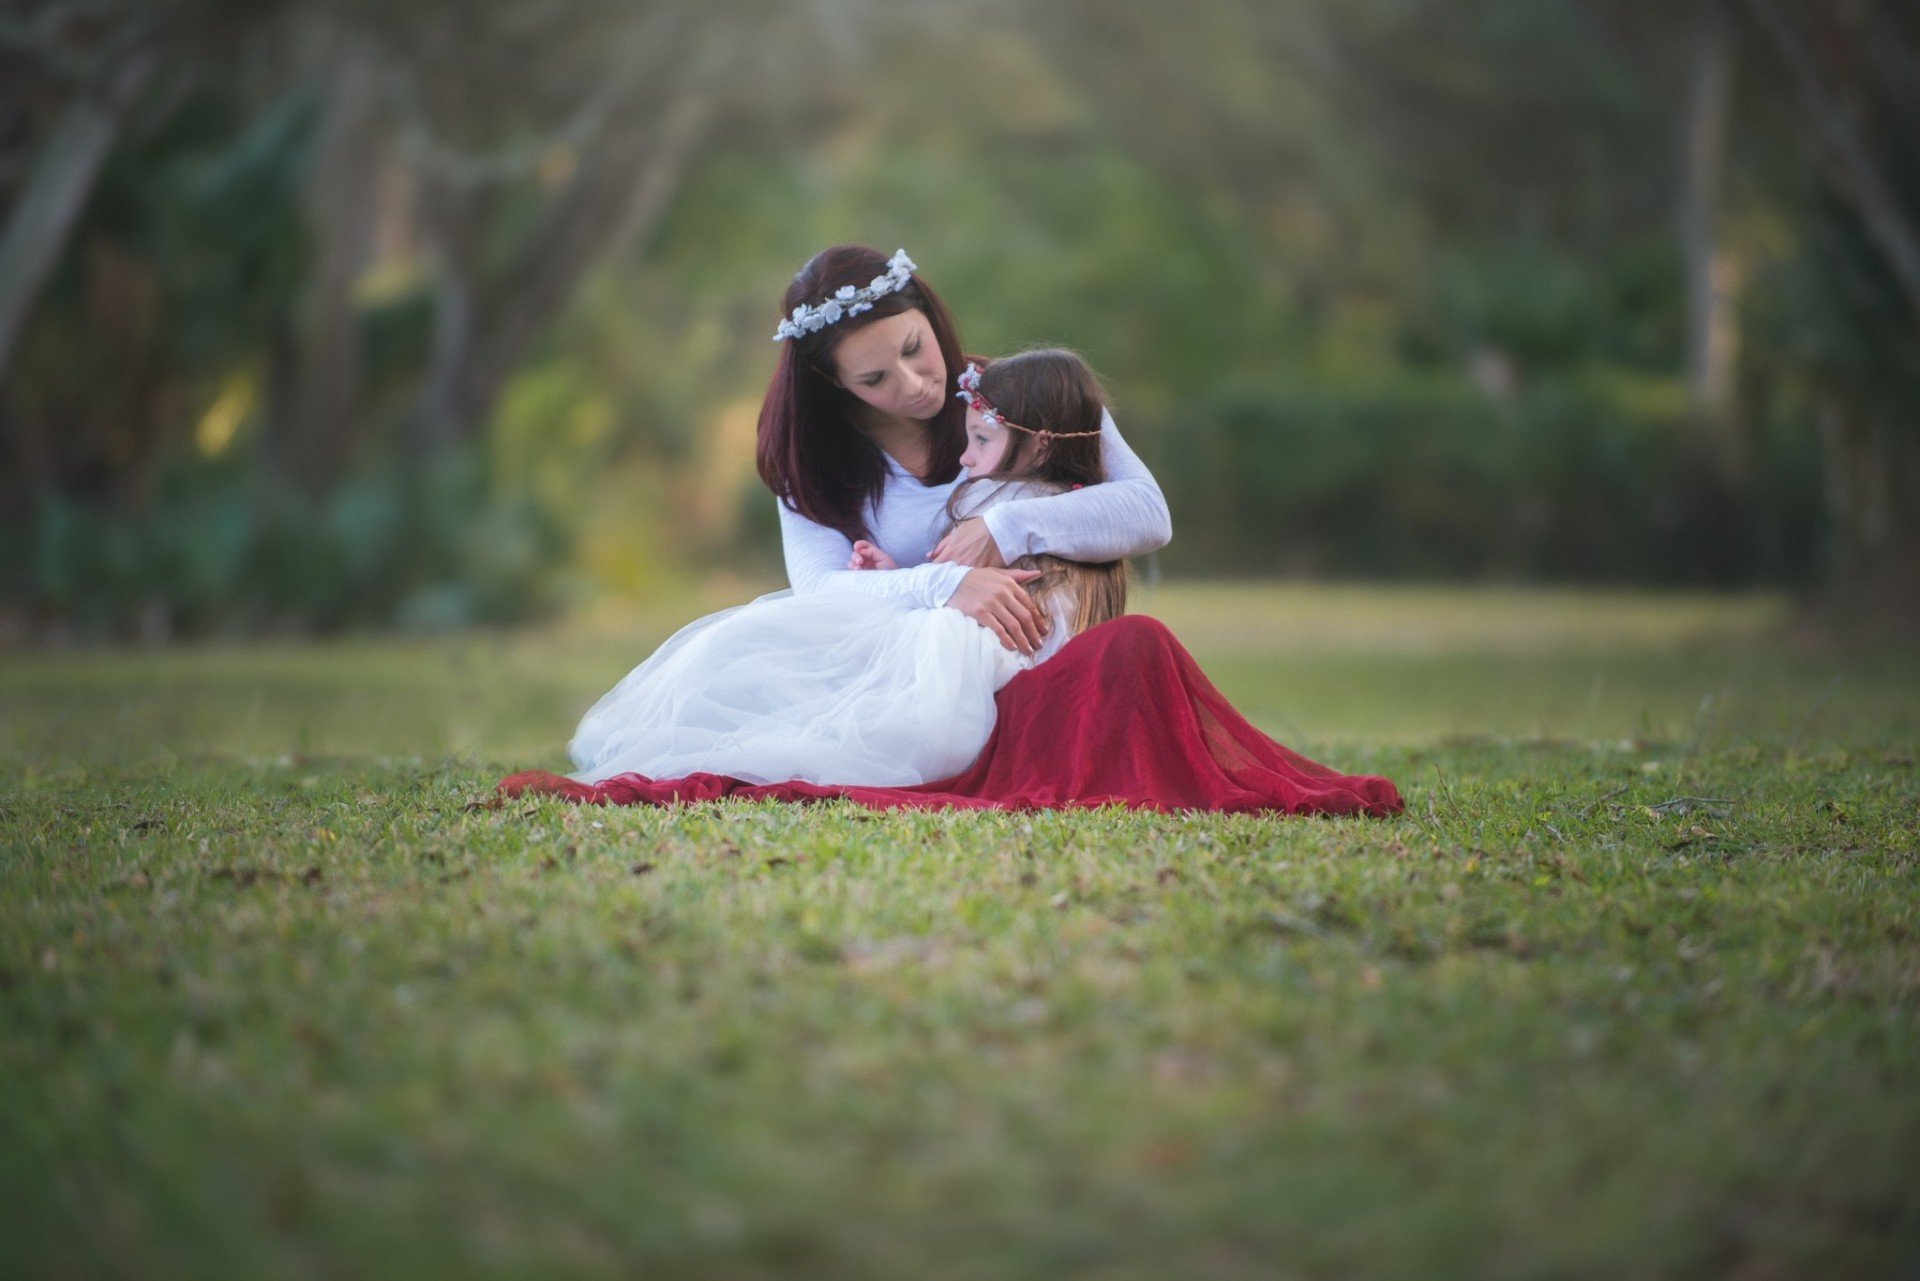 hug wallpaper download, people in nature, photograph, red, dress, beauty